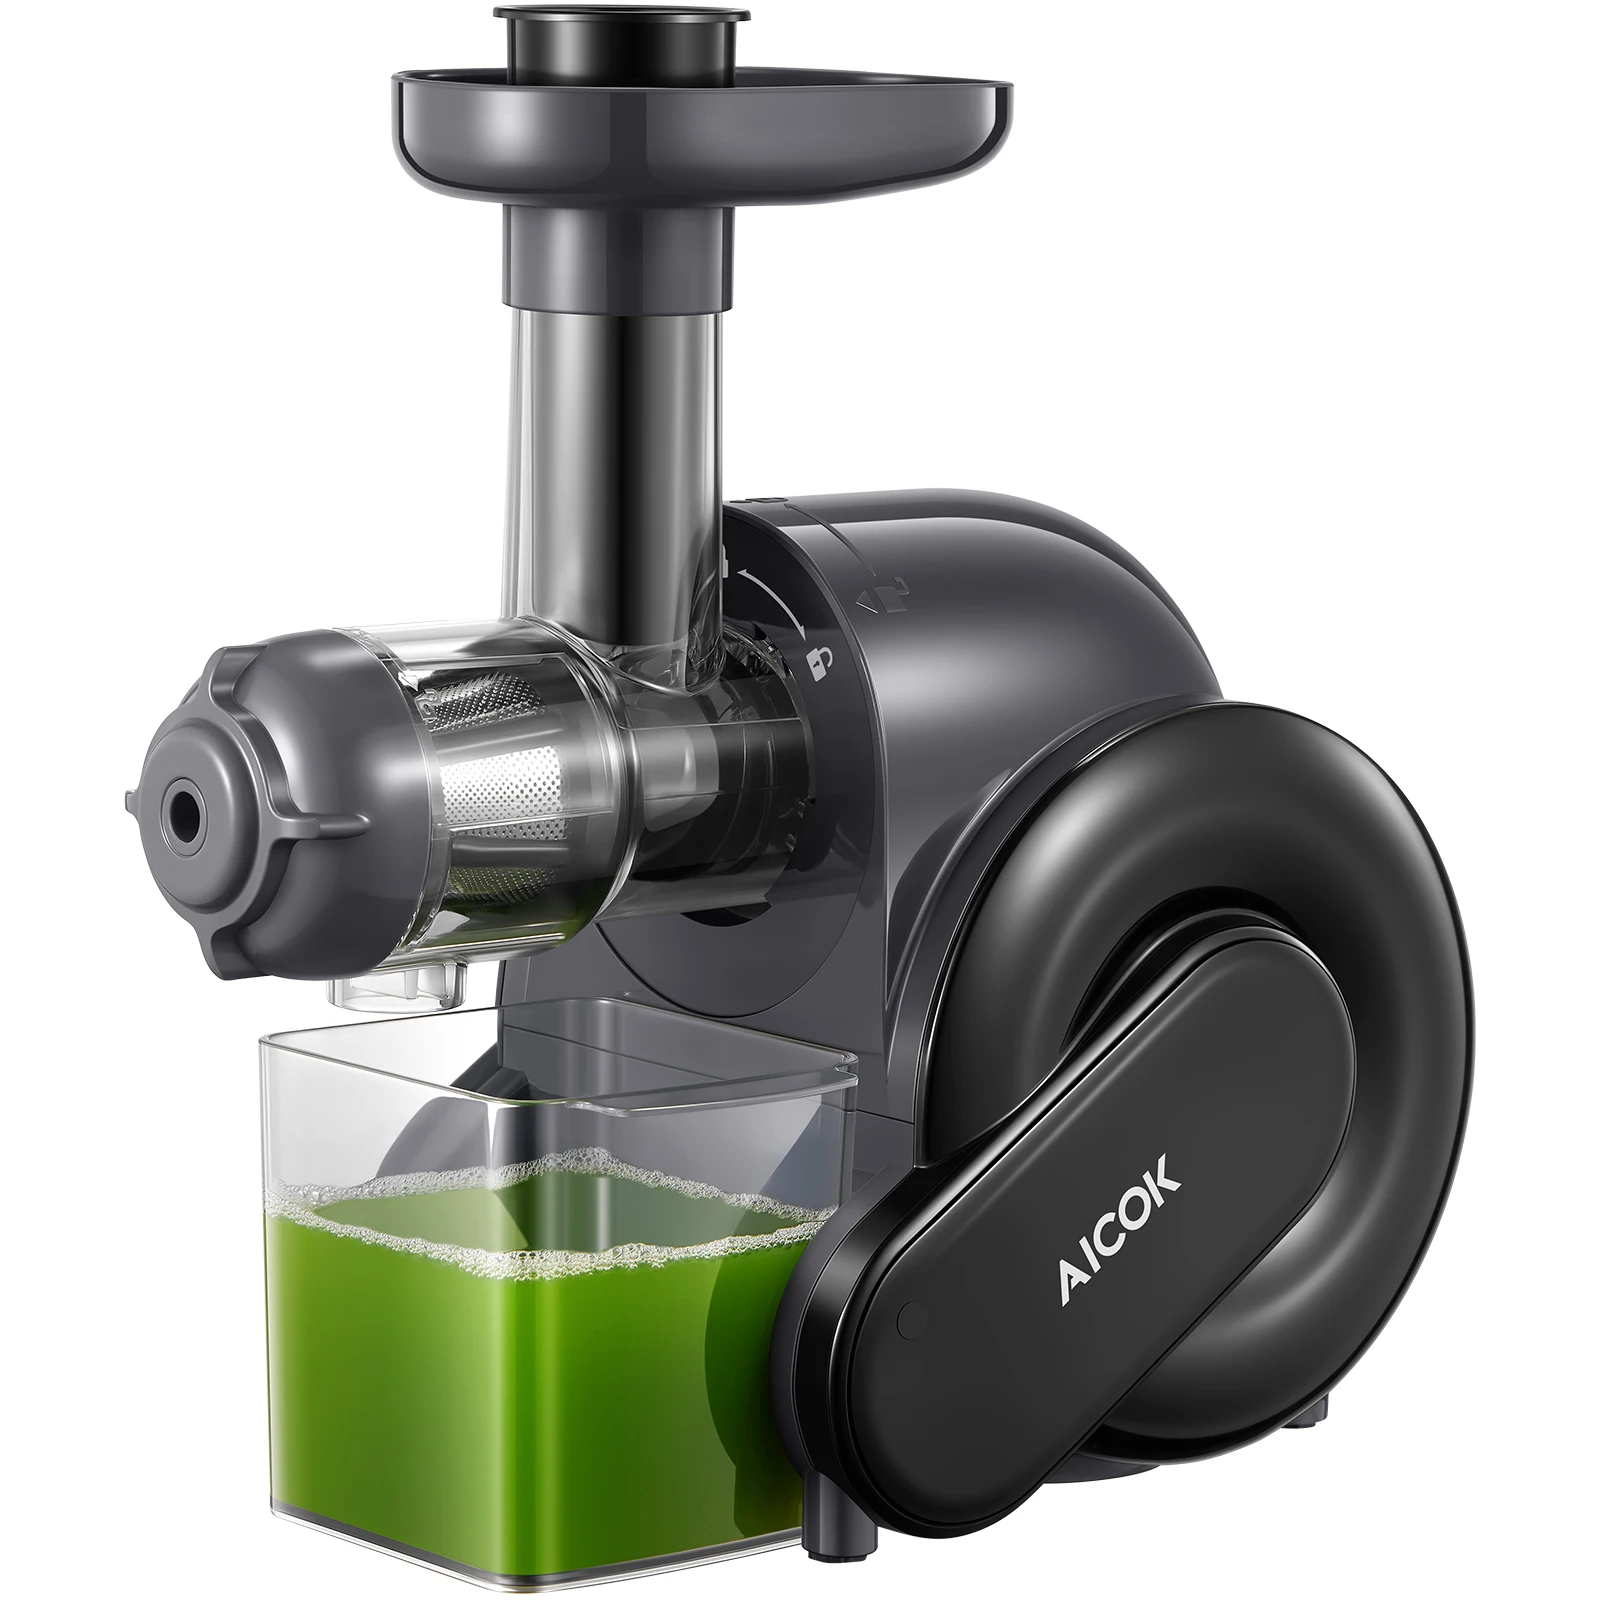 AICOK Slow Masticating Juicer for Hard & Soft Vegetable and Fruit, Quiet Motor, Safe Lock, Reserve Function, with Recipes